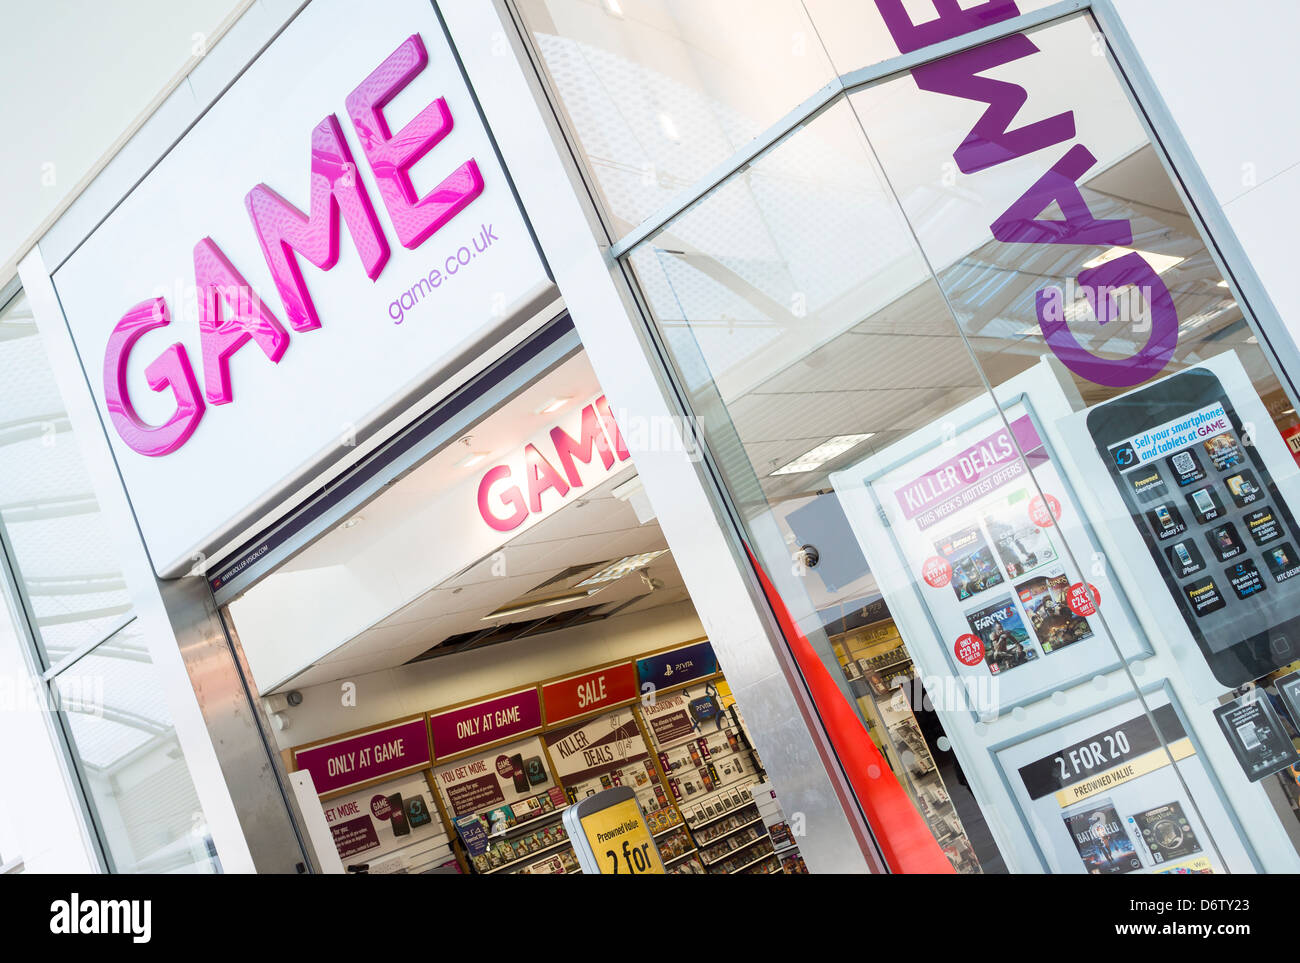 Game store front at the Metrocentre. Stock Photo